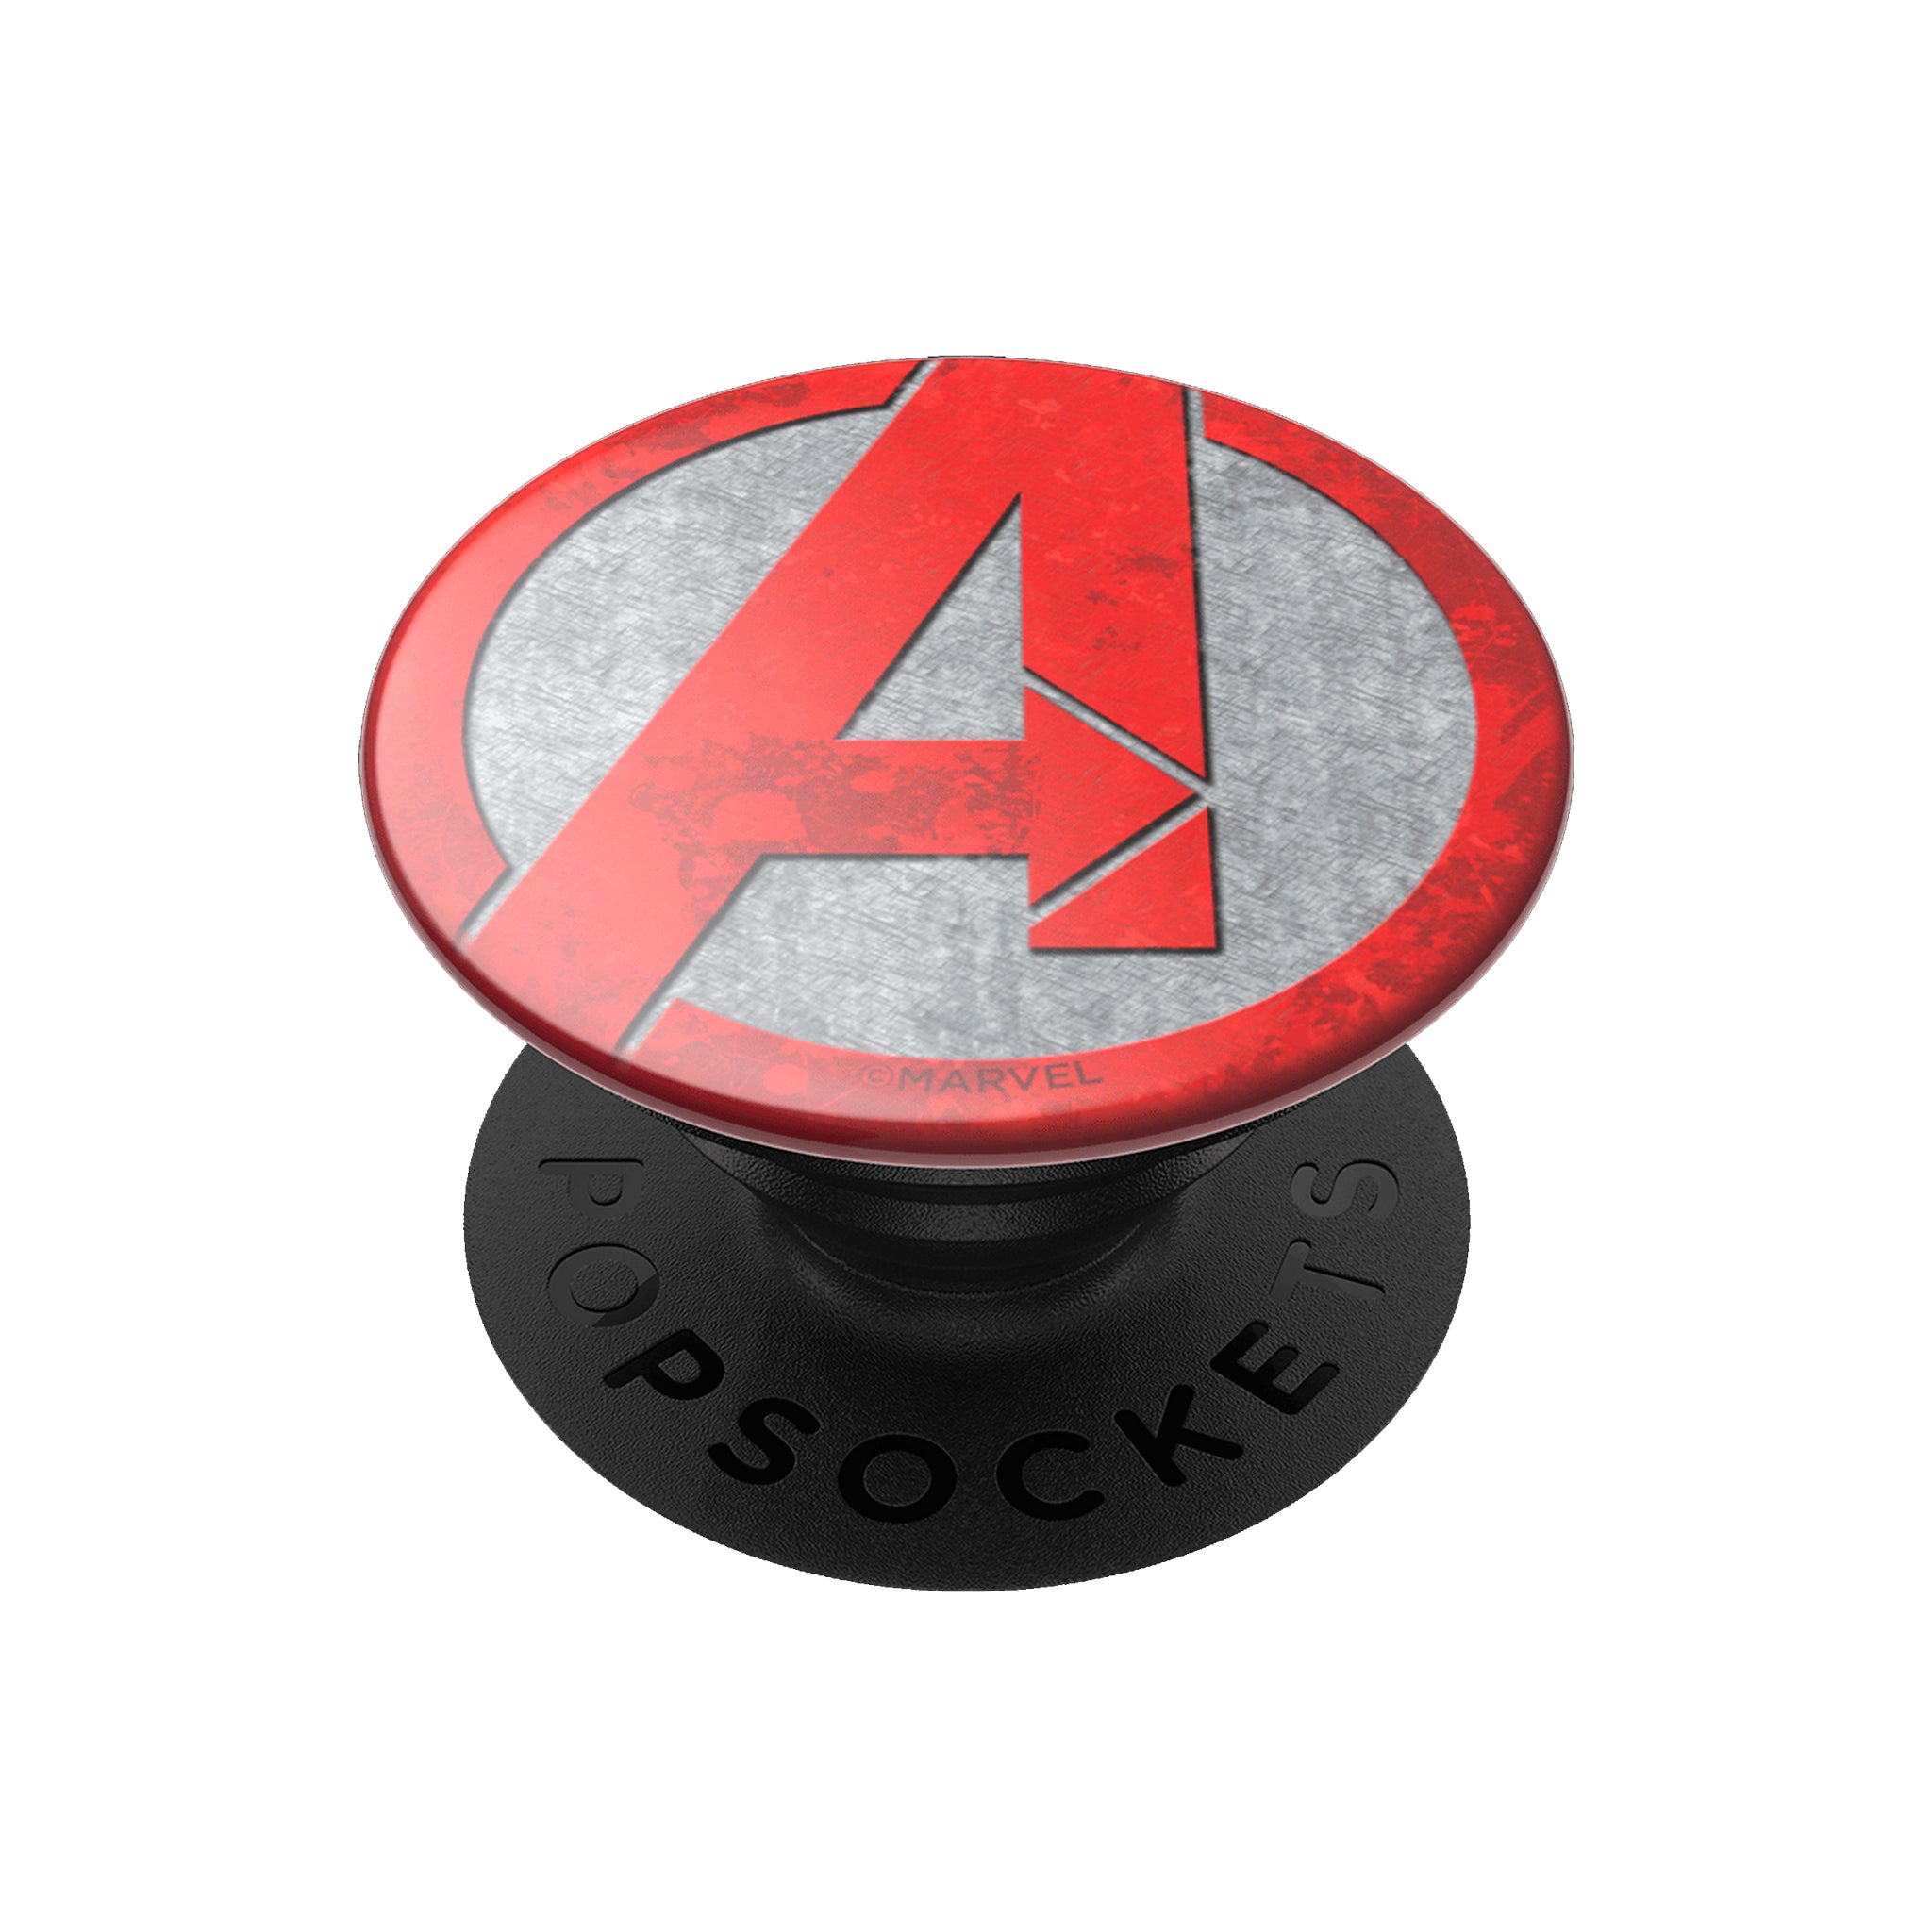 Popsockets - Popgrip Licensed Swappable Device Stand And Grip - Avengers Red Icon